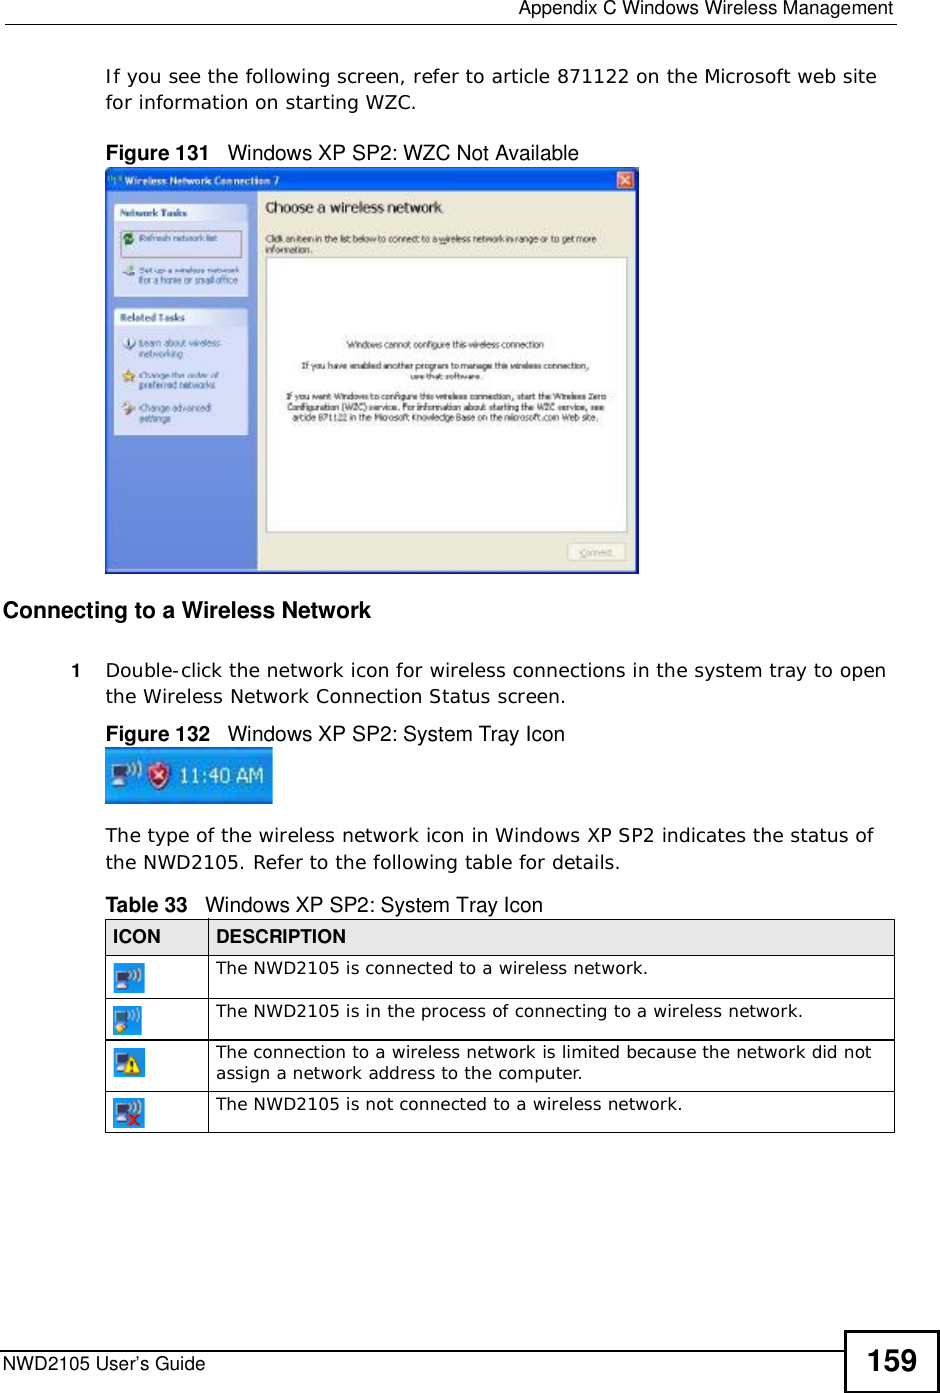  Appendix CWindows Wireless ManagementNWD2105 User’s Guide 159If you see the following screen, refer to article 871122 on the Microsoft web site for information on starting WZC.Figure 131   Windows XP SP2: WZC Not AvailableConnecting to a Wireless Network 1Double-click the network icon for wireless connections in the system tray to open the Wireless Network Connection Status screen.Figure 132   Windows XP SP2: System Tray IconThe type of the wireless network icon in Windows XP SP2 indicates the status of the NWD2105. Refer to the following table for details.Table 33   Windows XP SP2: System Tray IconICON DESCRIPTIONThe NWD2105 is connected to a wireless network.The NWD2105 is in the process of connecting to a wireless network.The connection to a wireless network is limited because the network did not assign a network address to the computer.The NWD2105 is not connected to a wireless network.